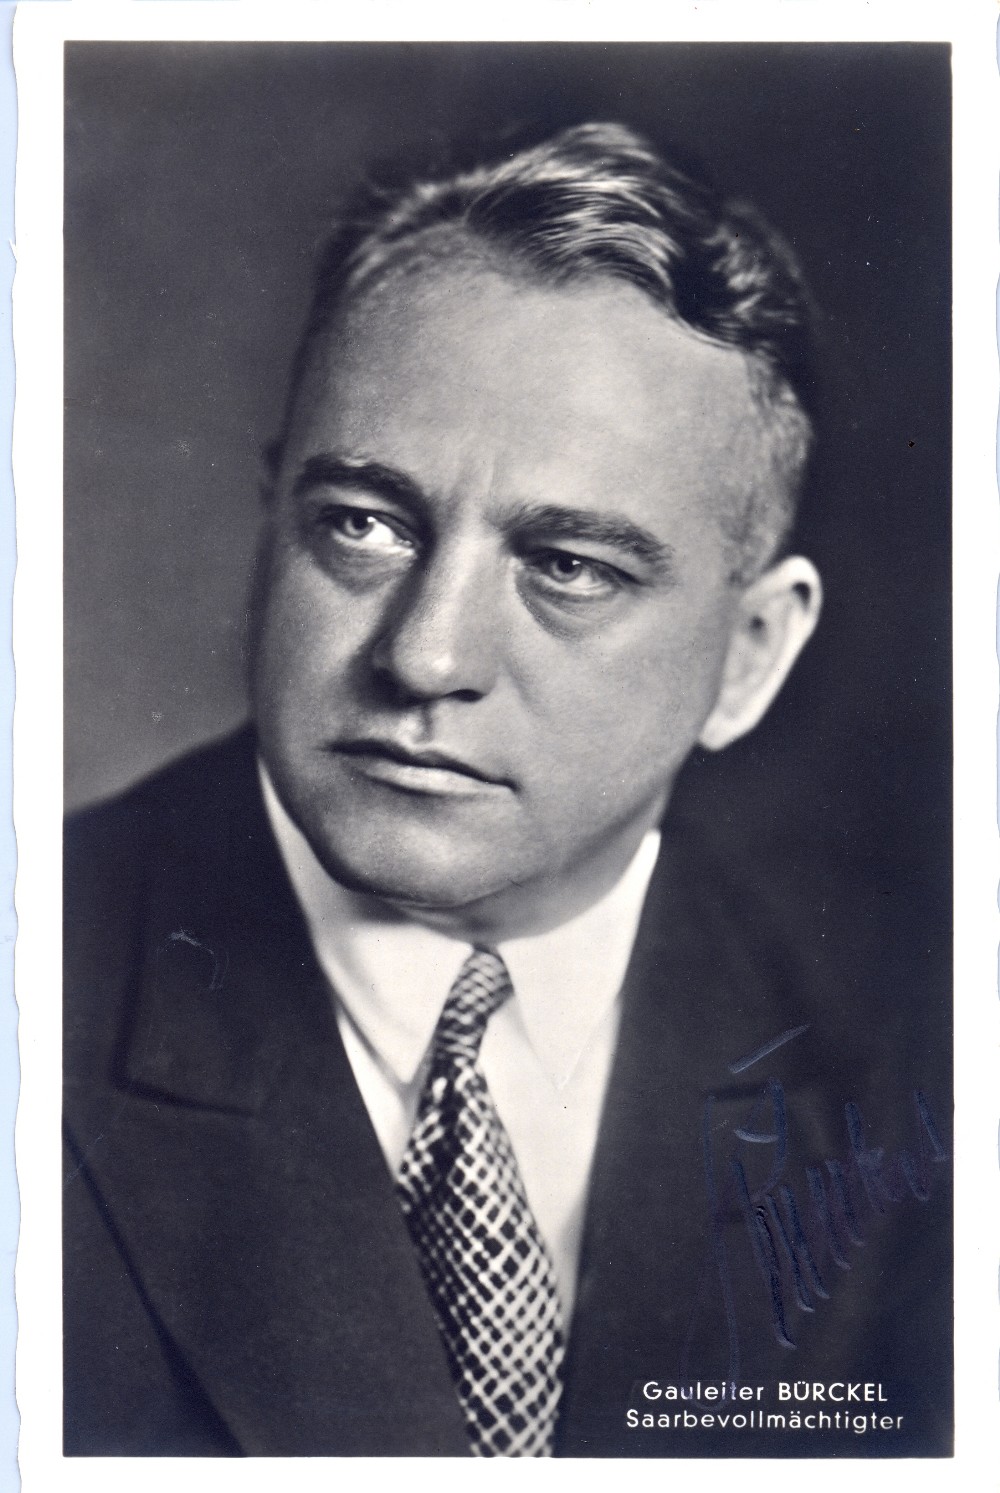 BÃœRCKEL JOSEPH: (1895-1944) German Politician, a member of the Reichstag, an early member of the